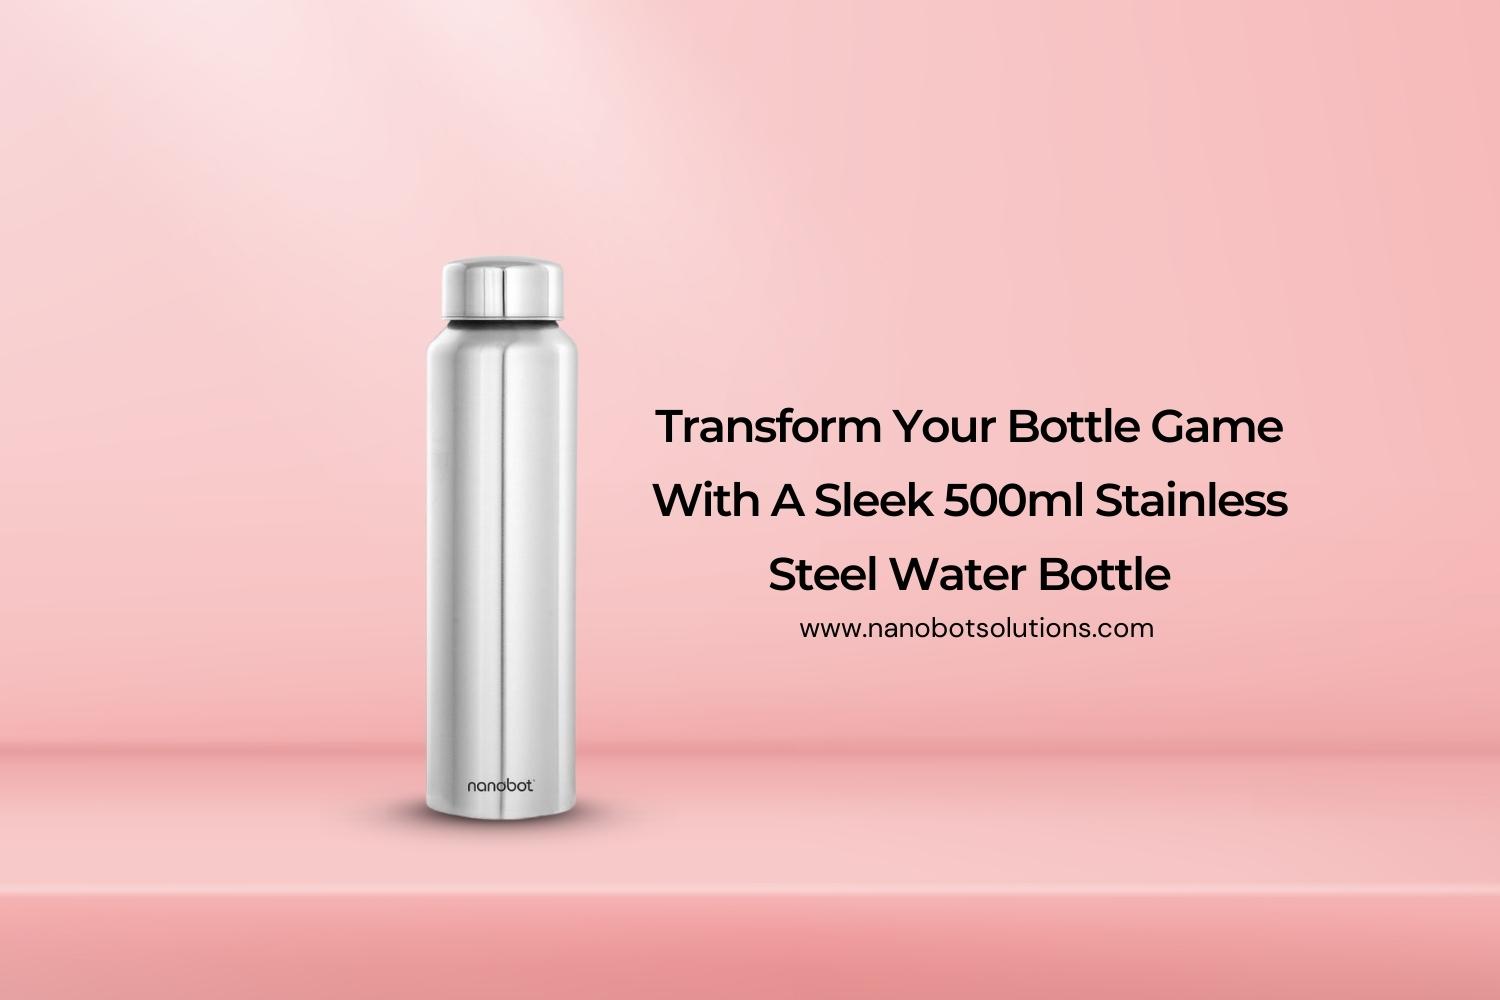 Transform Your Bottle Game With A Sleek 500ml Stainless Steel Water Bottle | Nanobot